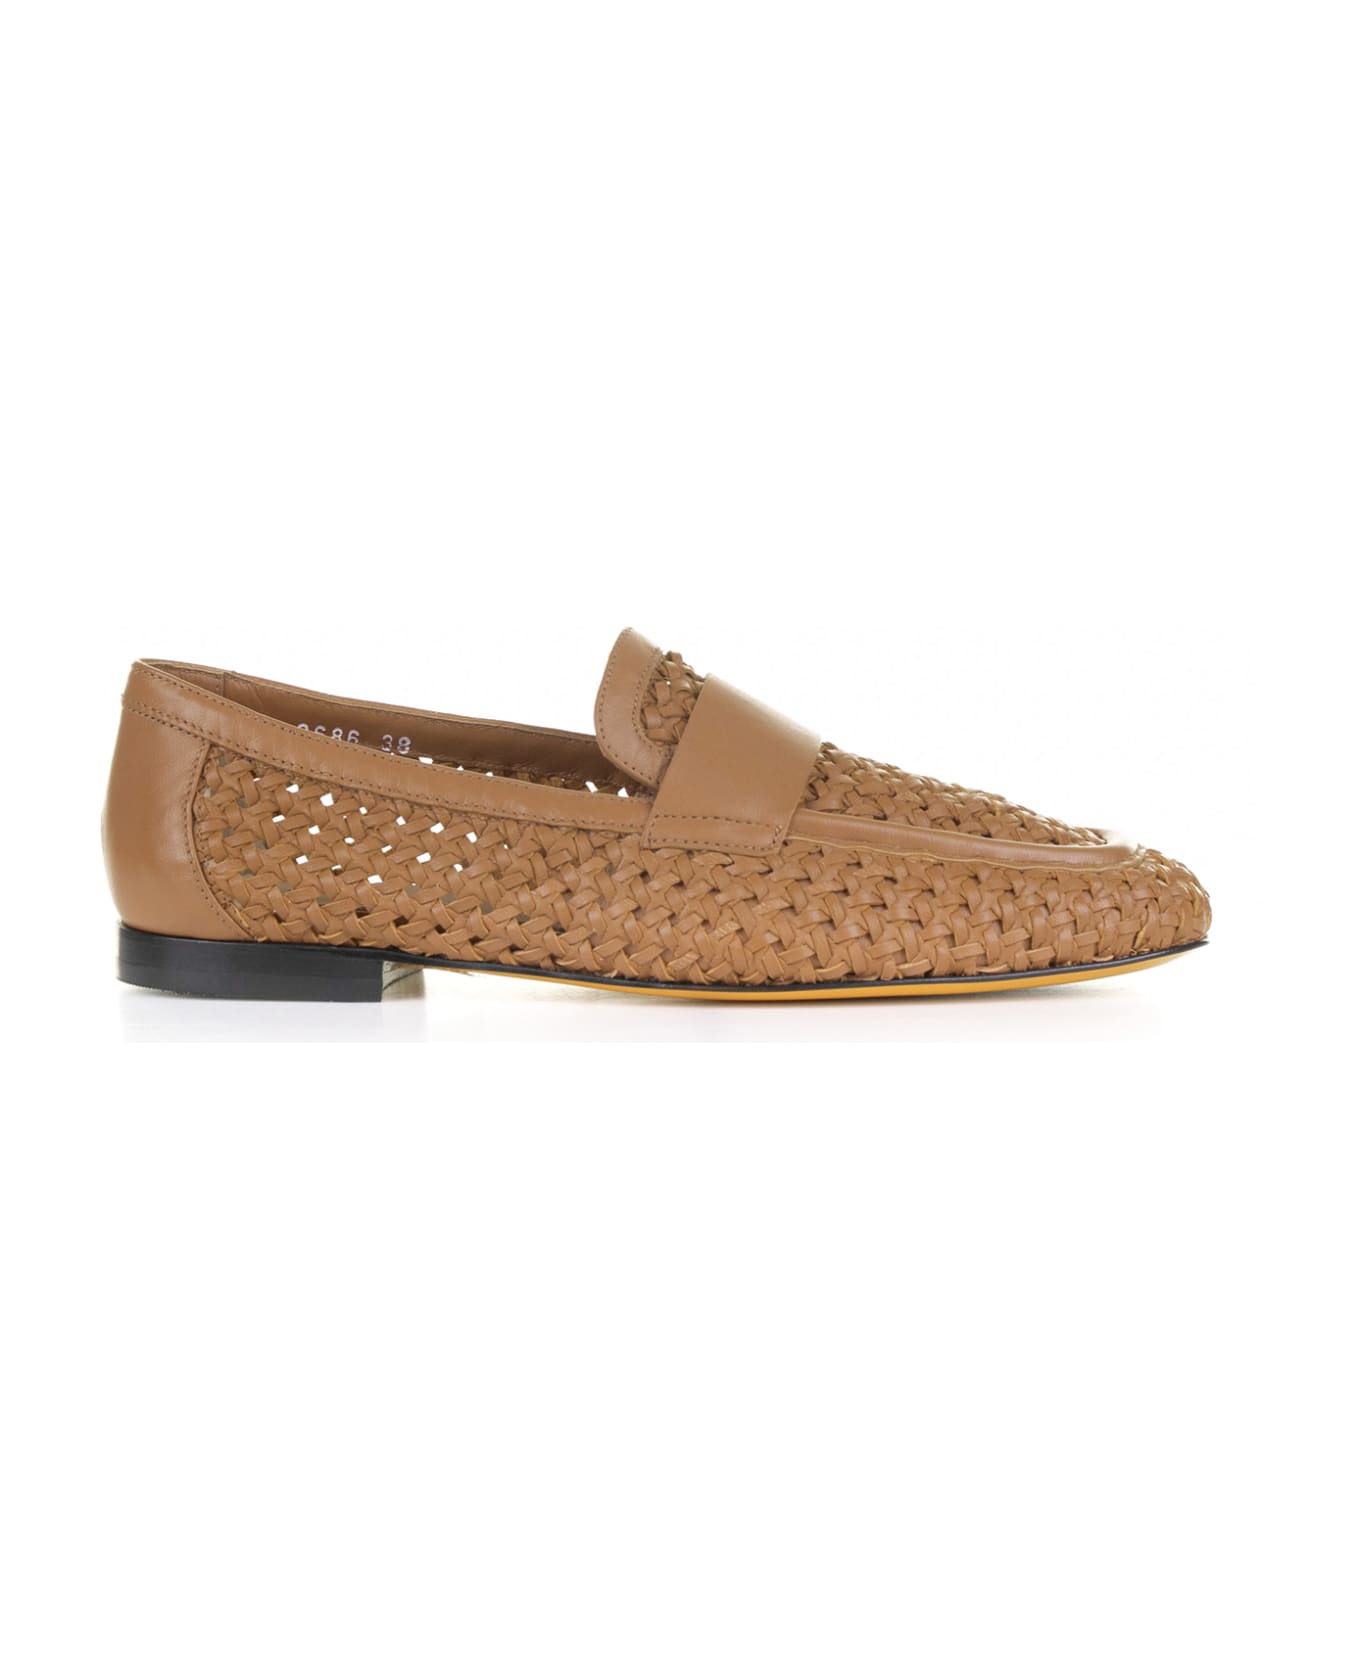 Doucal's Woven Leather Moccasin - NOCE フラットシューズ